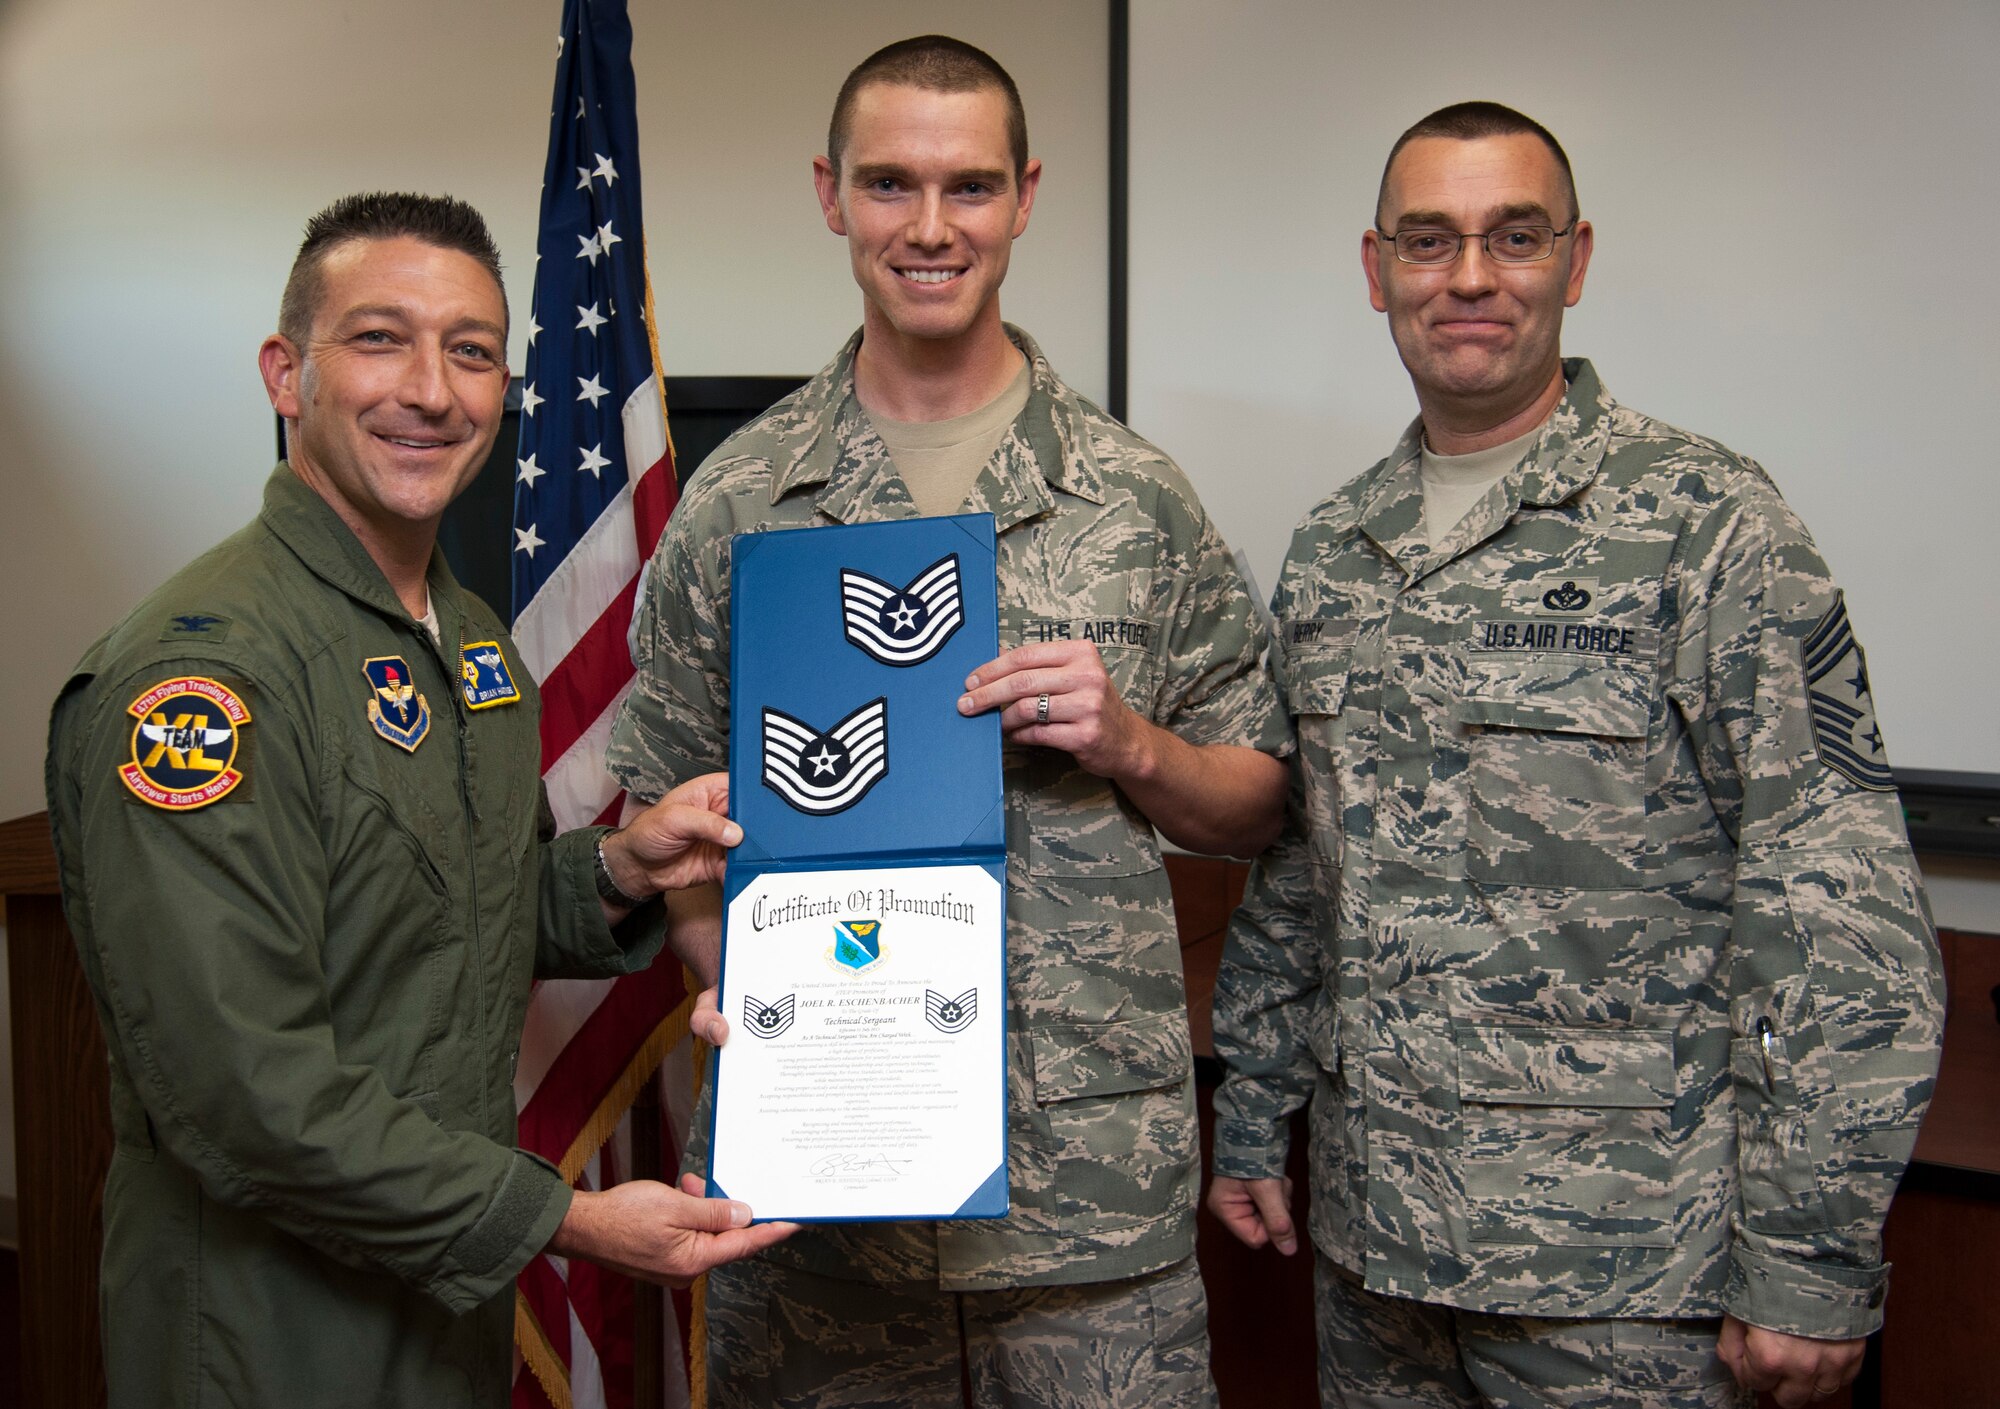 Newly promoted Tech. Sgt. Joel R. Eschenbacher, 47th Force Support Squadron manpower and organizations analysis technician, poses with Col. Brian Hastings, 47th Flying Training Wing commander, and Chief Master Sgt. Gary Berry, 47th FTW command chief, after being presented technical sergeant rank through the Air Force's Stripes for Exceptional Performers program here July 31, 2013. The STEP program is a highly visible promotion recognition program used by commanders at all levels to recognize the outstanding contributions and accomplishments of senior airmen, staff sergeants and technical sergeants. (U.S. Air Force photo/Senior Airman John D. Partlow)